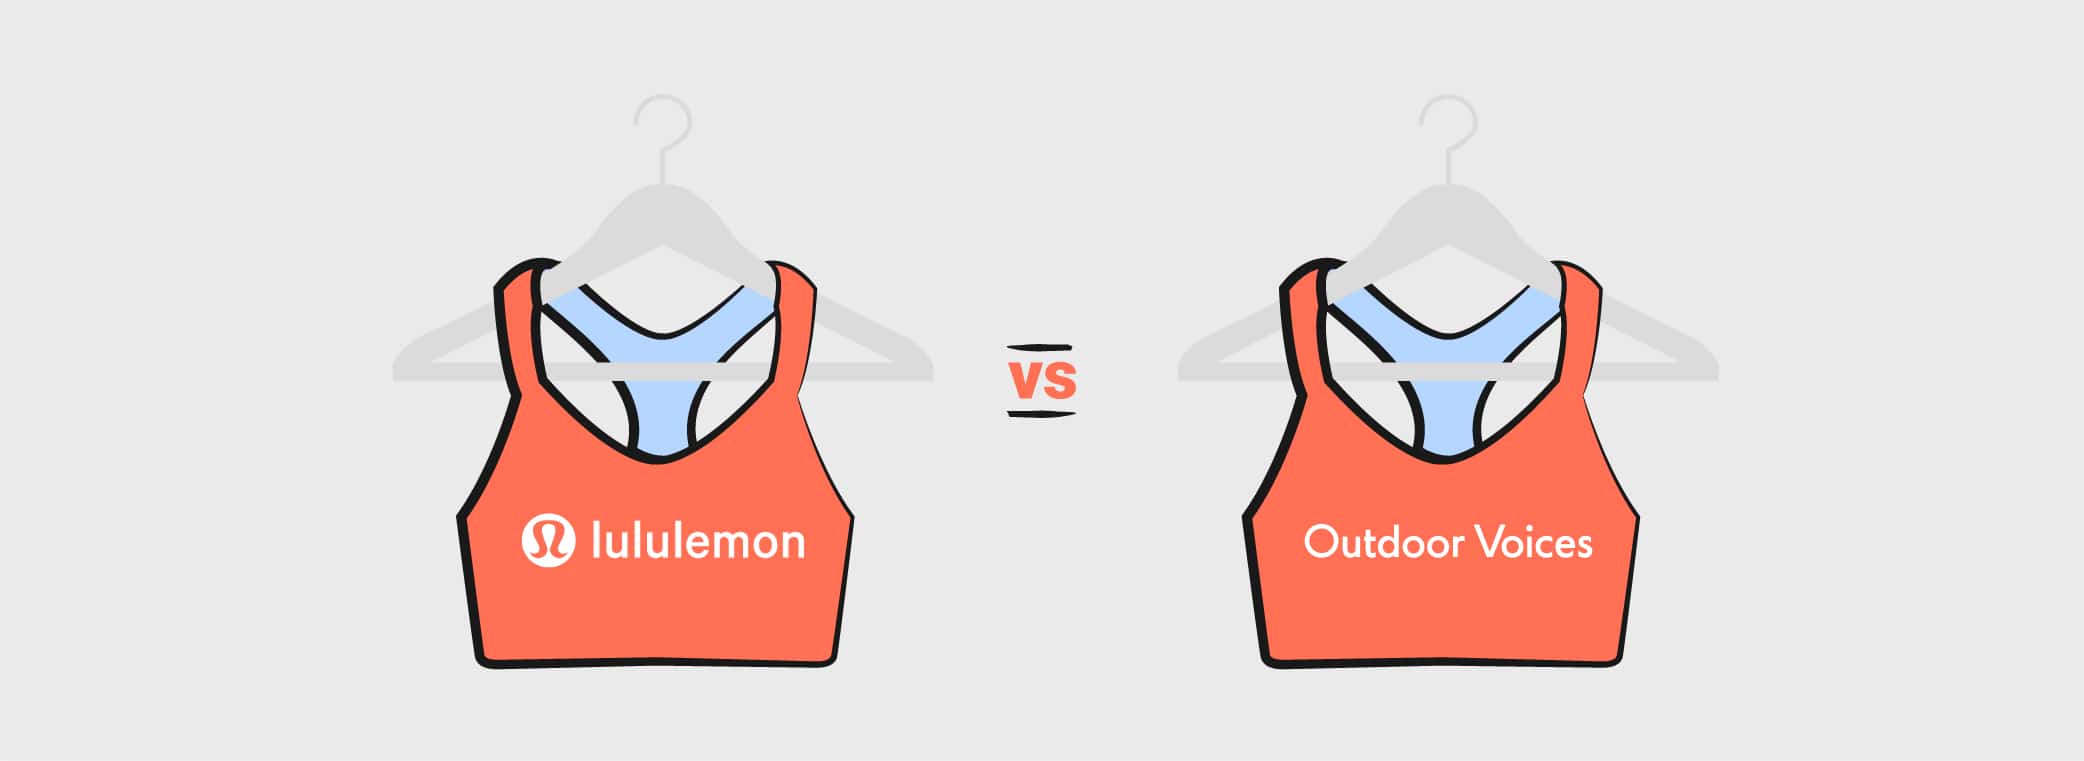 Email Showdown: Lululemon Vs. Outdoor Voices - Email Marketing